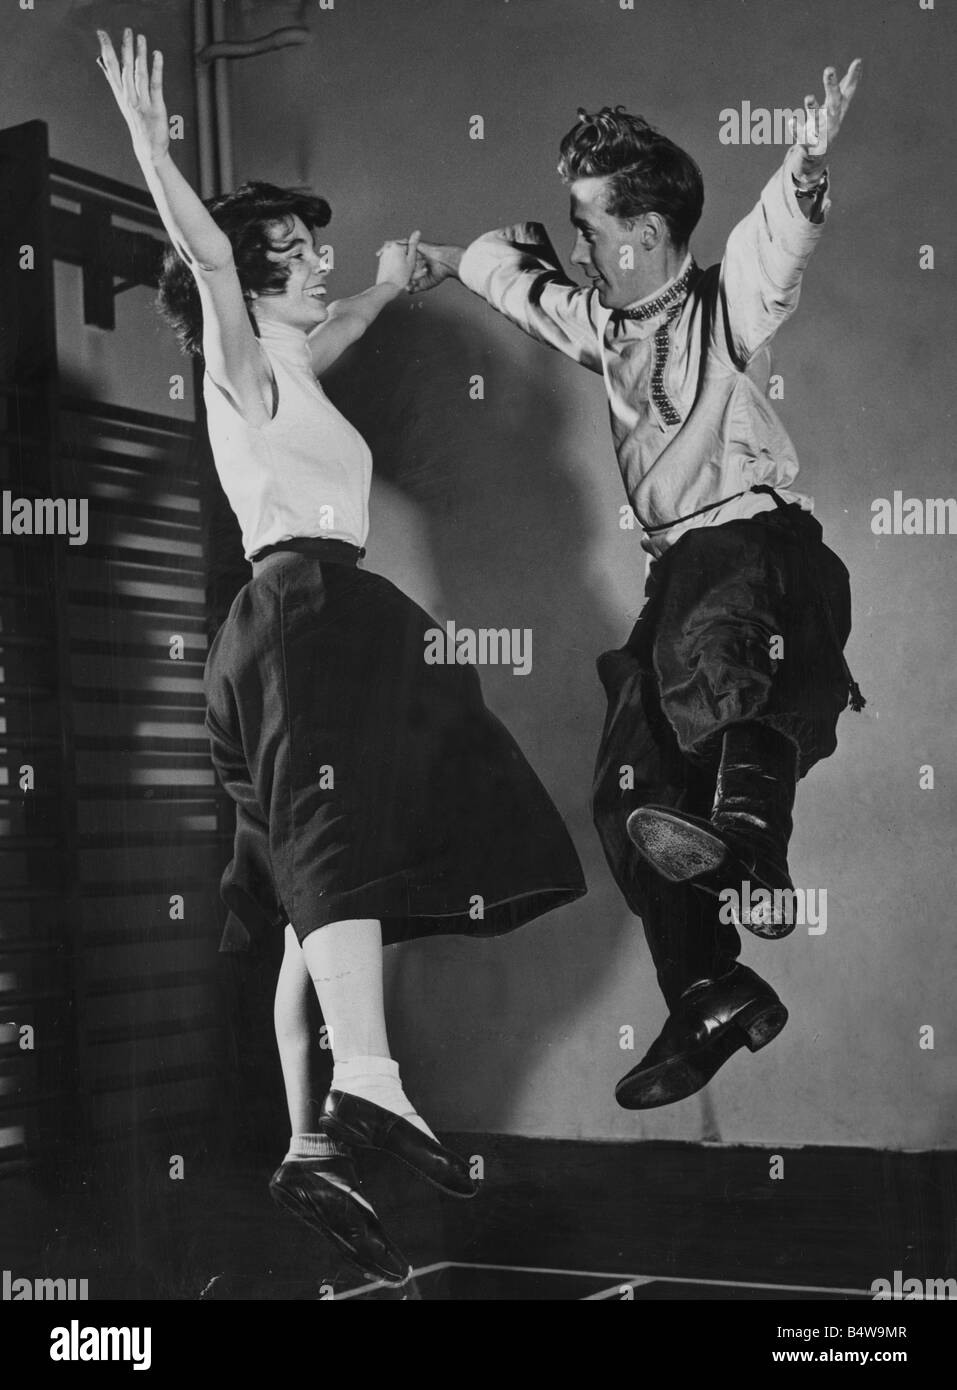 A couple performing a traditional Russian folk dance during a rehearsal of Olk Dancing at the carlyle School in Chelsea where they are preparing to give a festival of dances at the Albert Hall April 1953 Mirrorpix couple dancing men women 1950s humour clothing Stock Photo